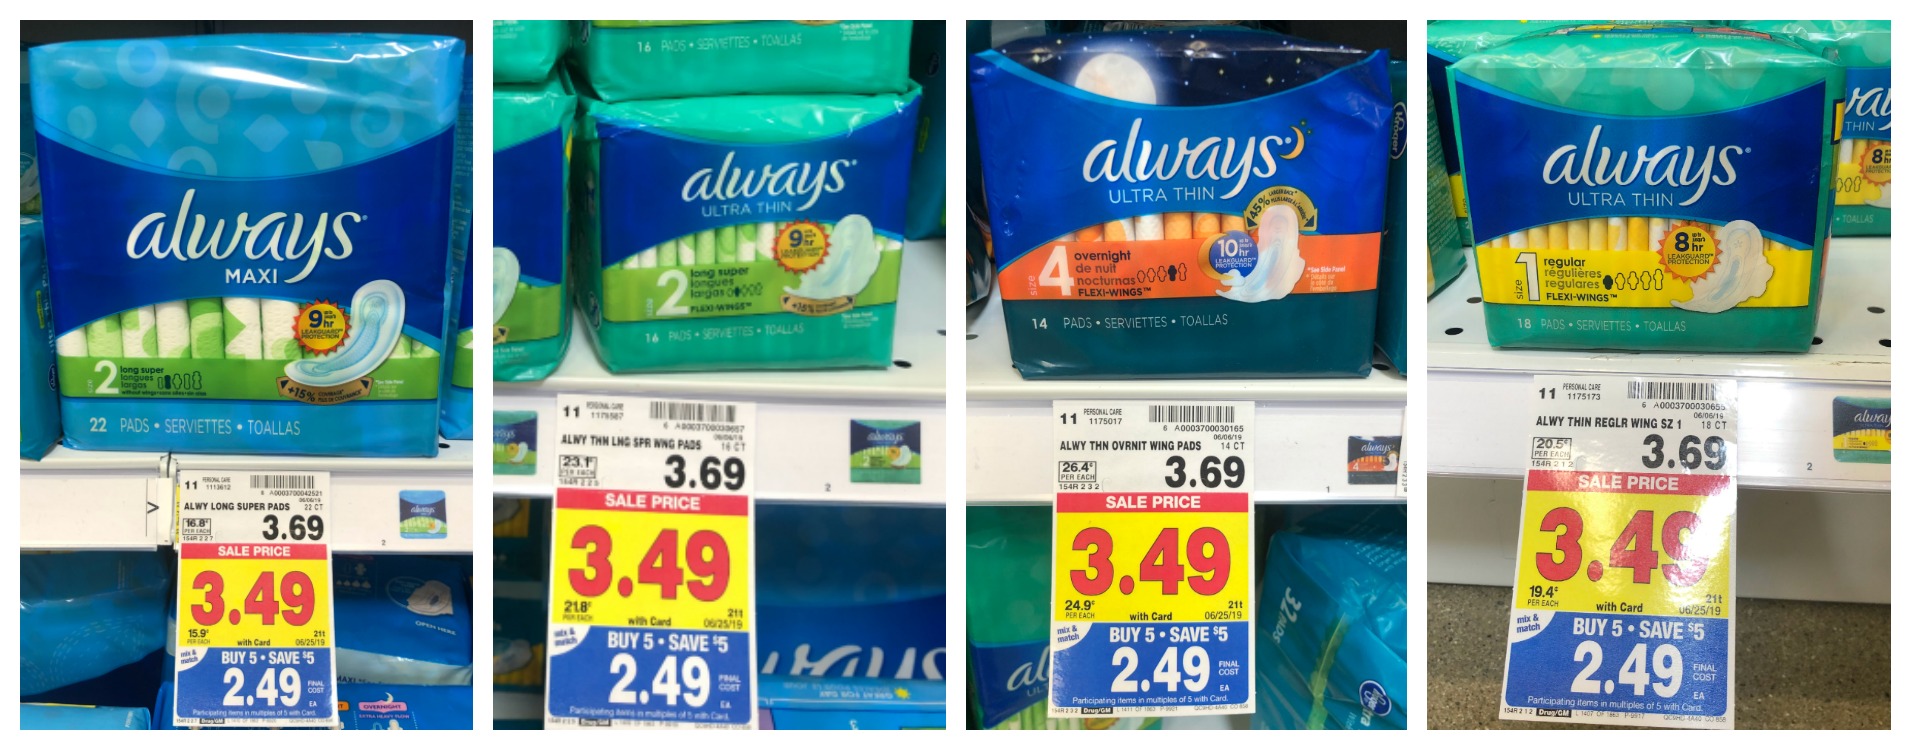 Always Pads and Tampax Tampons as low as $1.49 with Kroger Mega